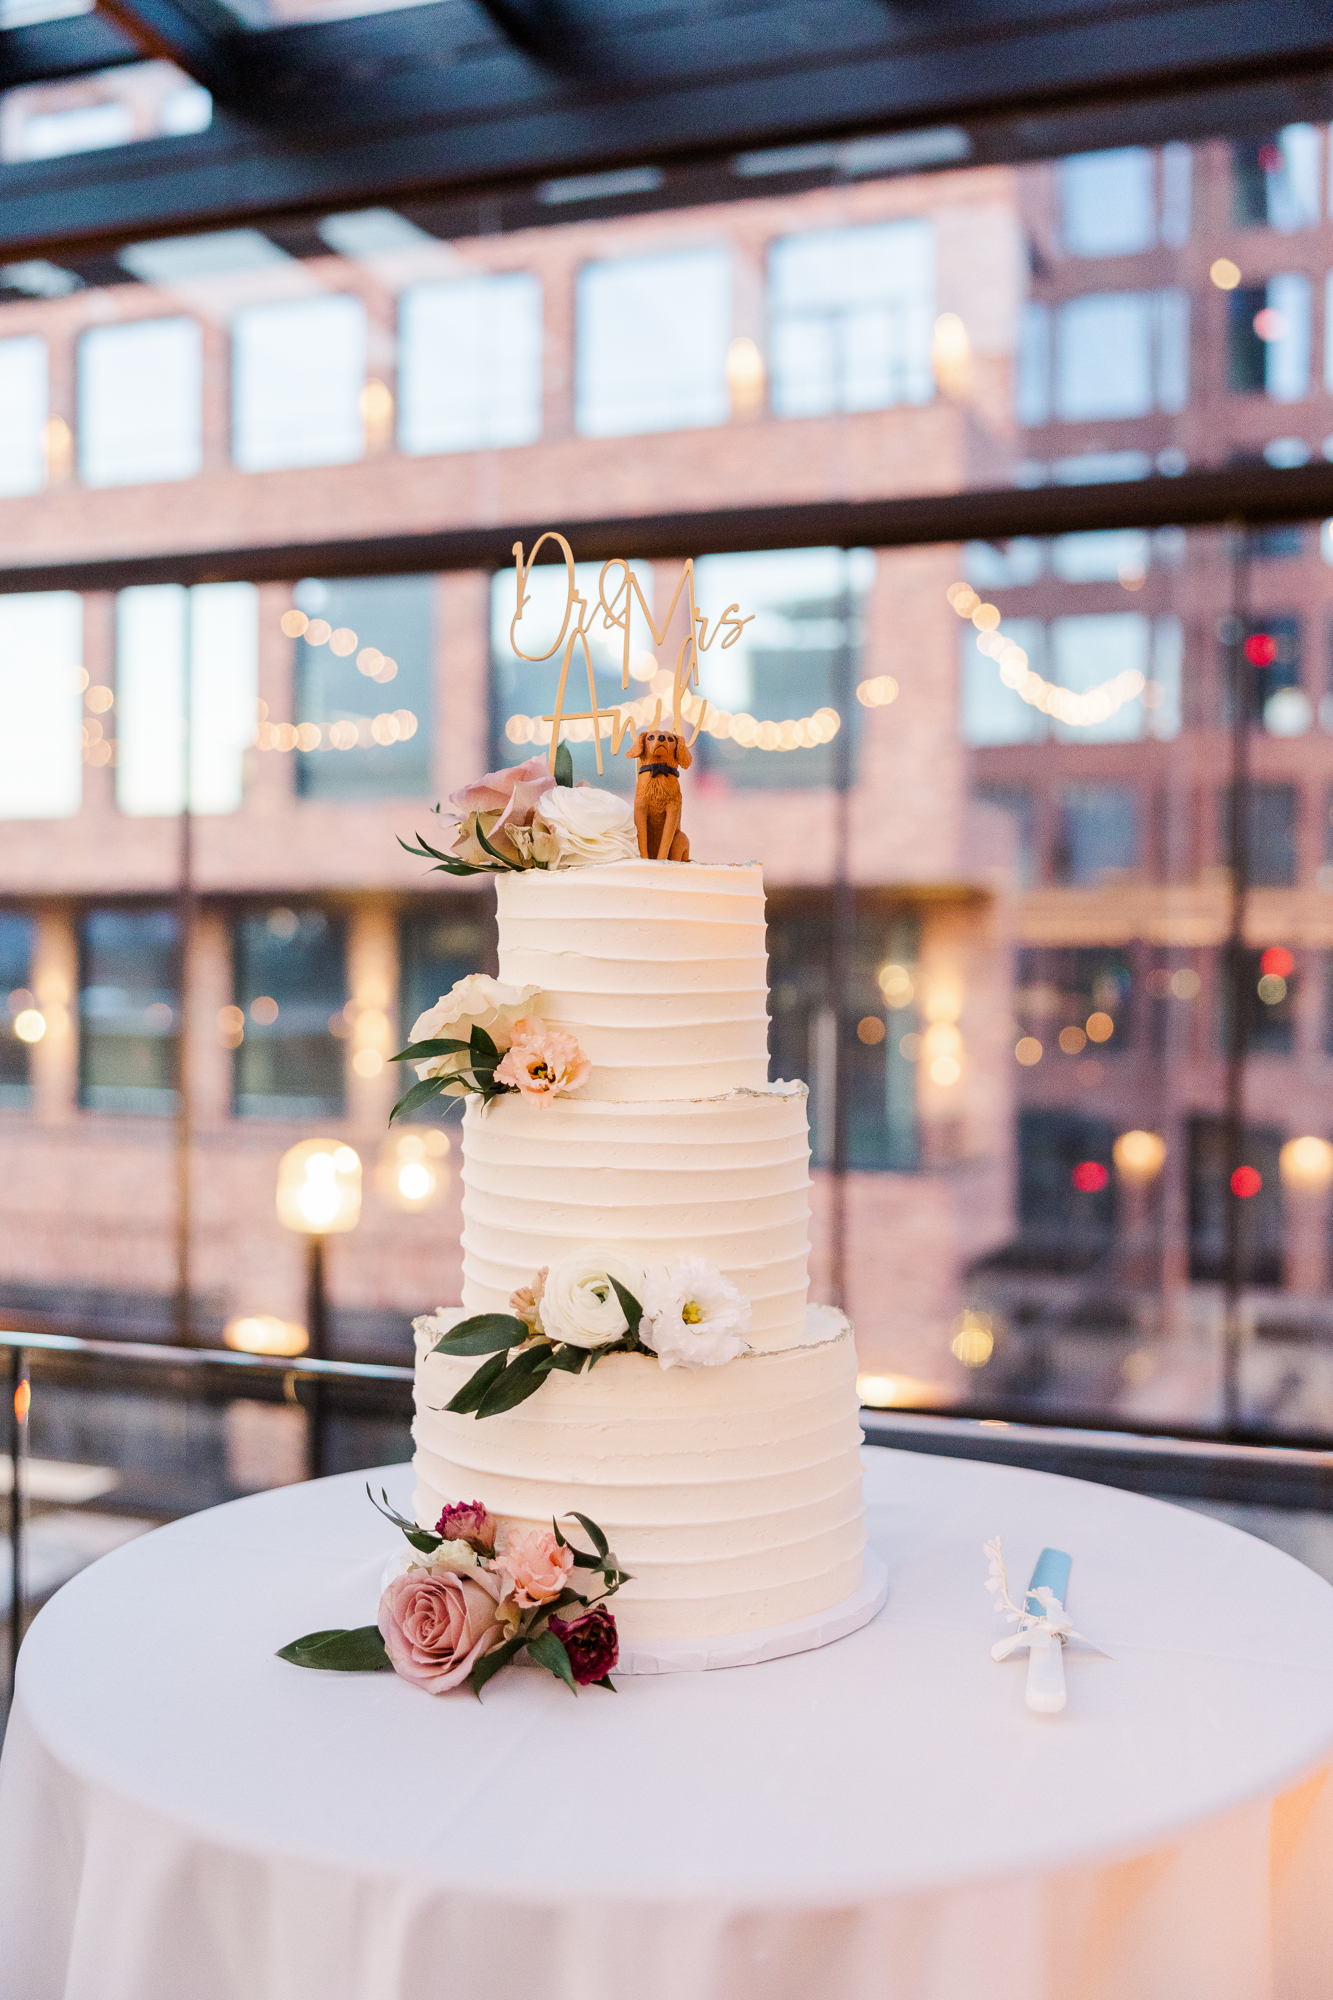 Wonderful 74Wythe Wedding Photography in Wintery Brooklyn with Rooftop Views